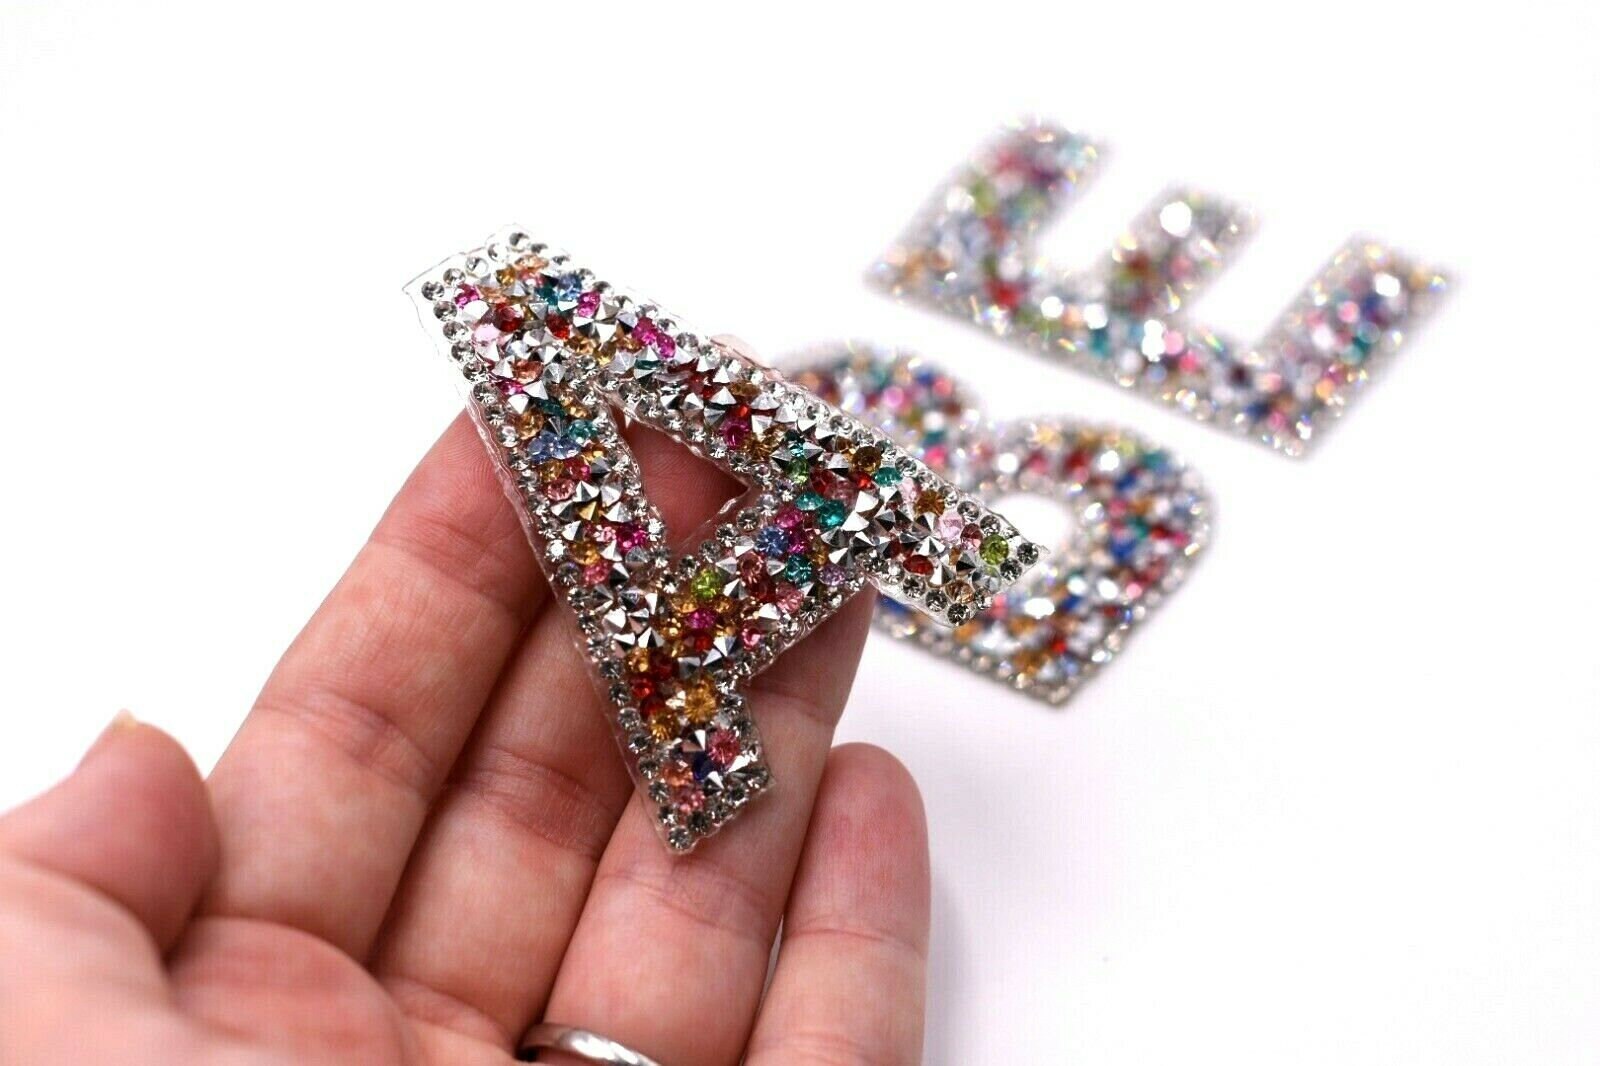 26 Pcs Rhinestone Iron on Letters Patches for DIY Supplies, Iron on Letters for Clothing/Hats/Shoes/Bags, Glitter Iron on Letters for Fabric A-Z